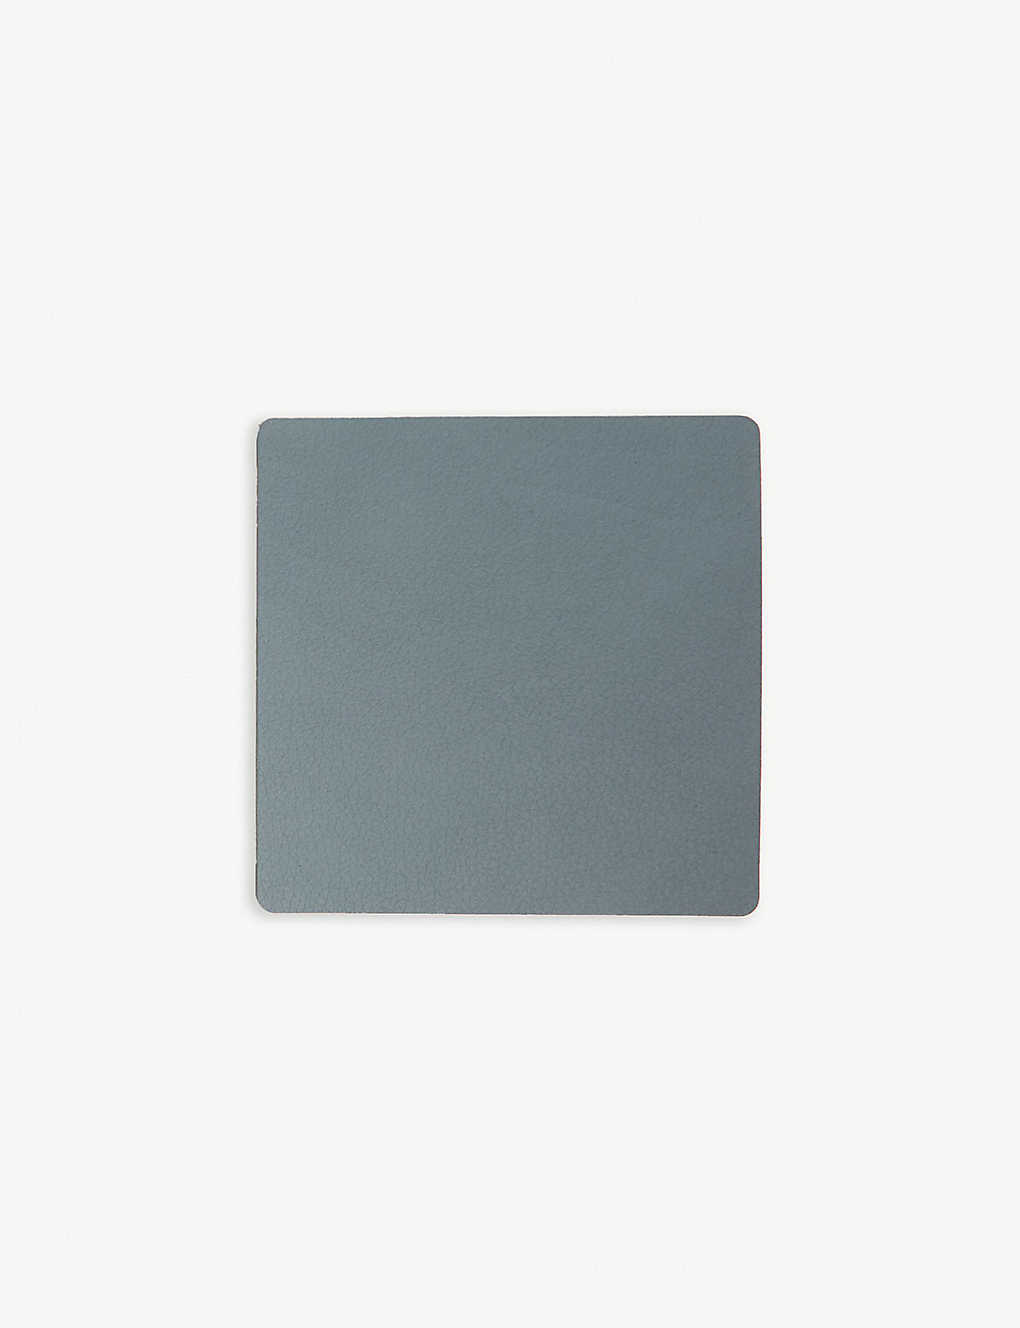 Lind Dna Nupo Square Leather Coaster In Light Blue